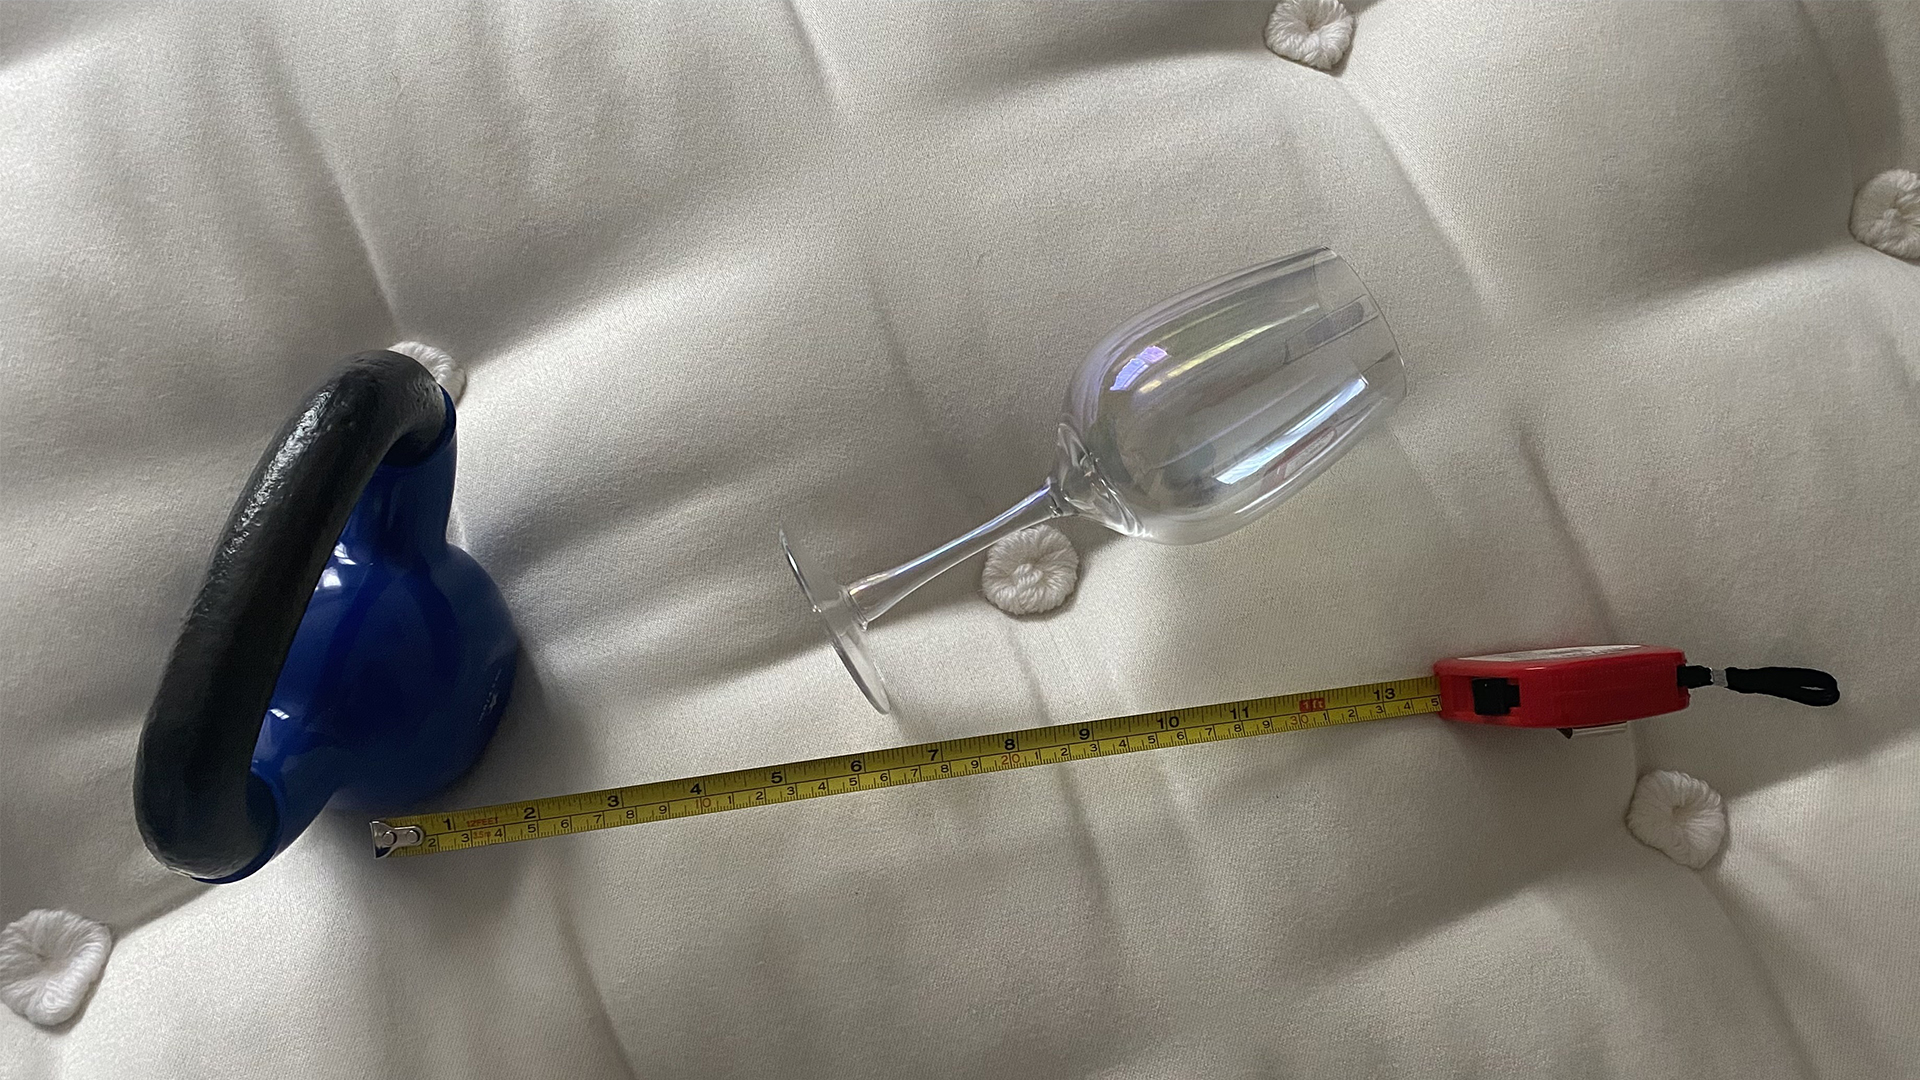 A 4.5kg weight resting on the surface of a Simba Earth Escape mattress, a wine glass has fallen over next to it, anda. tape measure shows there is three inches between the kettlebell and the glass